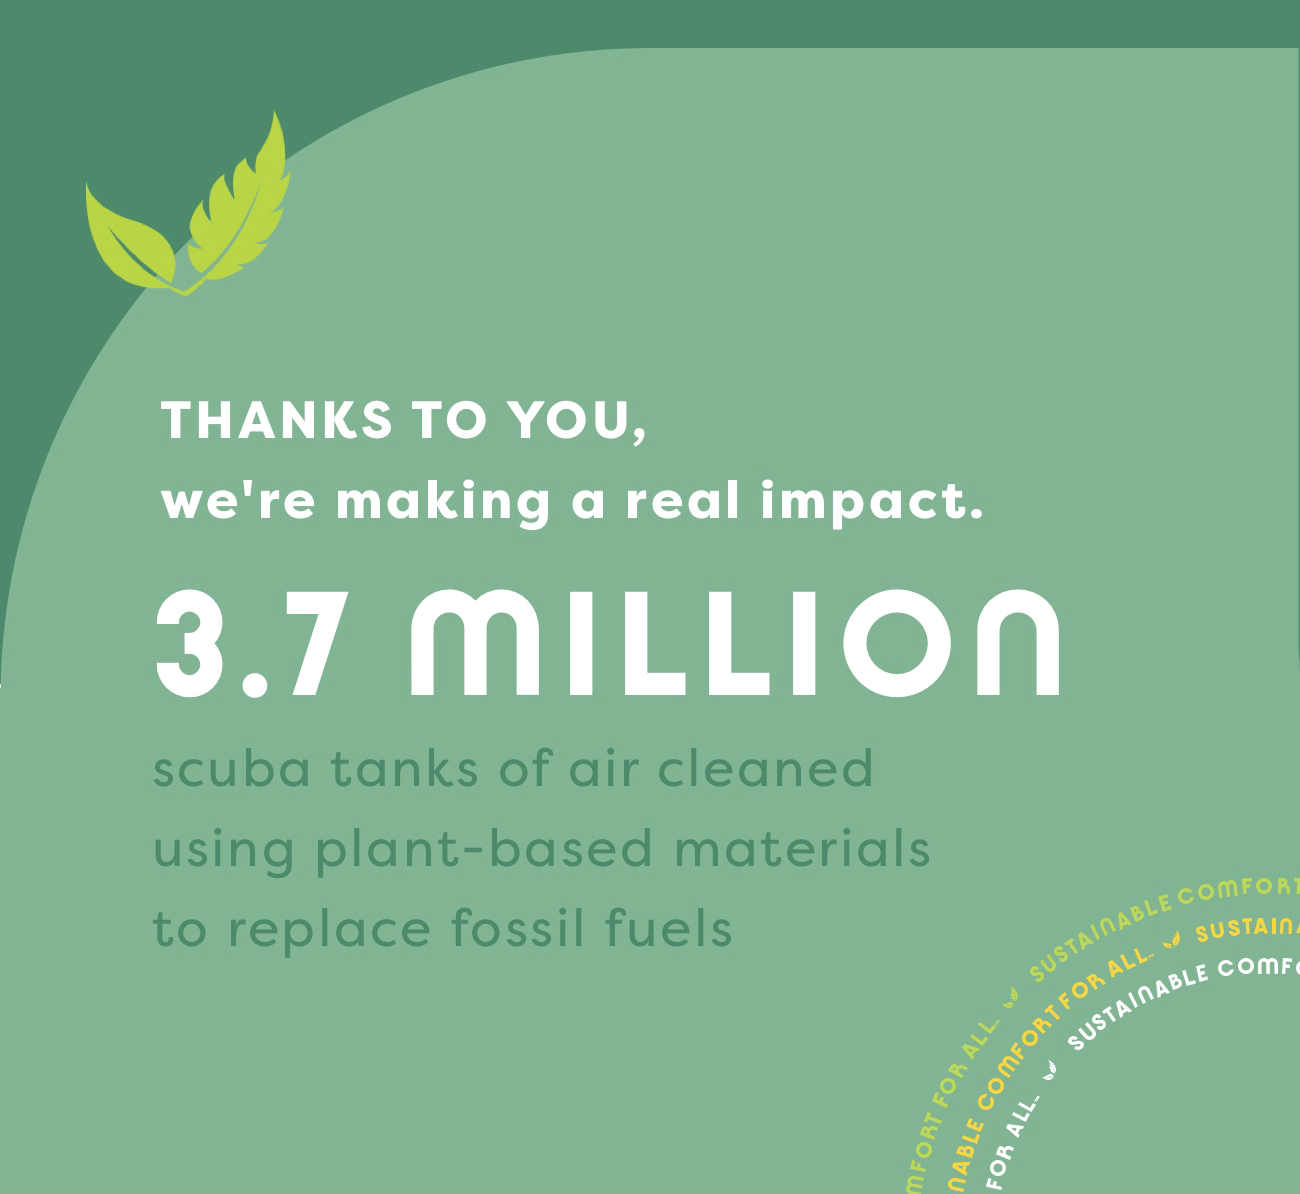 Thanks To You, We're Making A Real Impact. | Sustainable Comfort For All